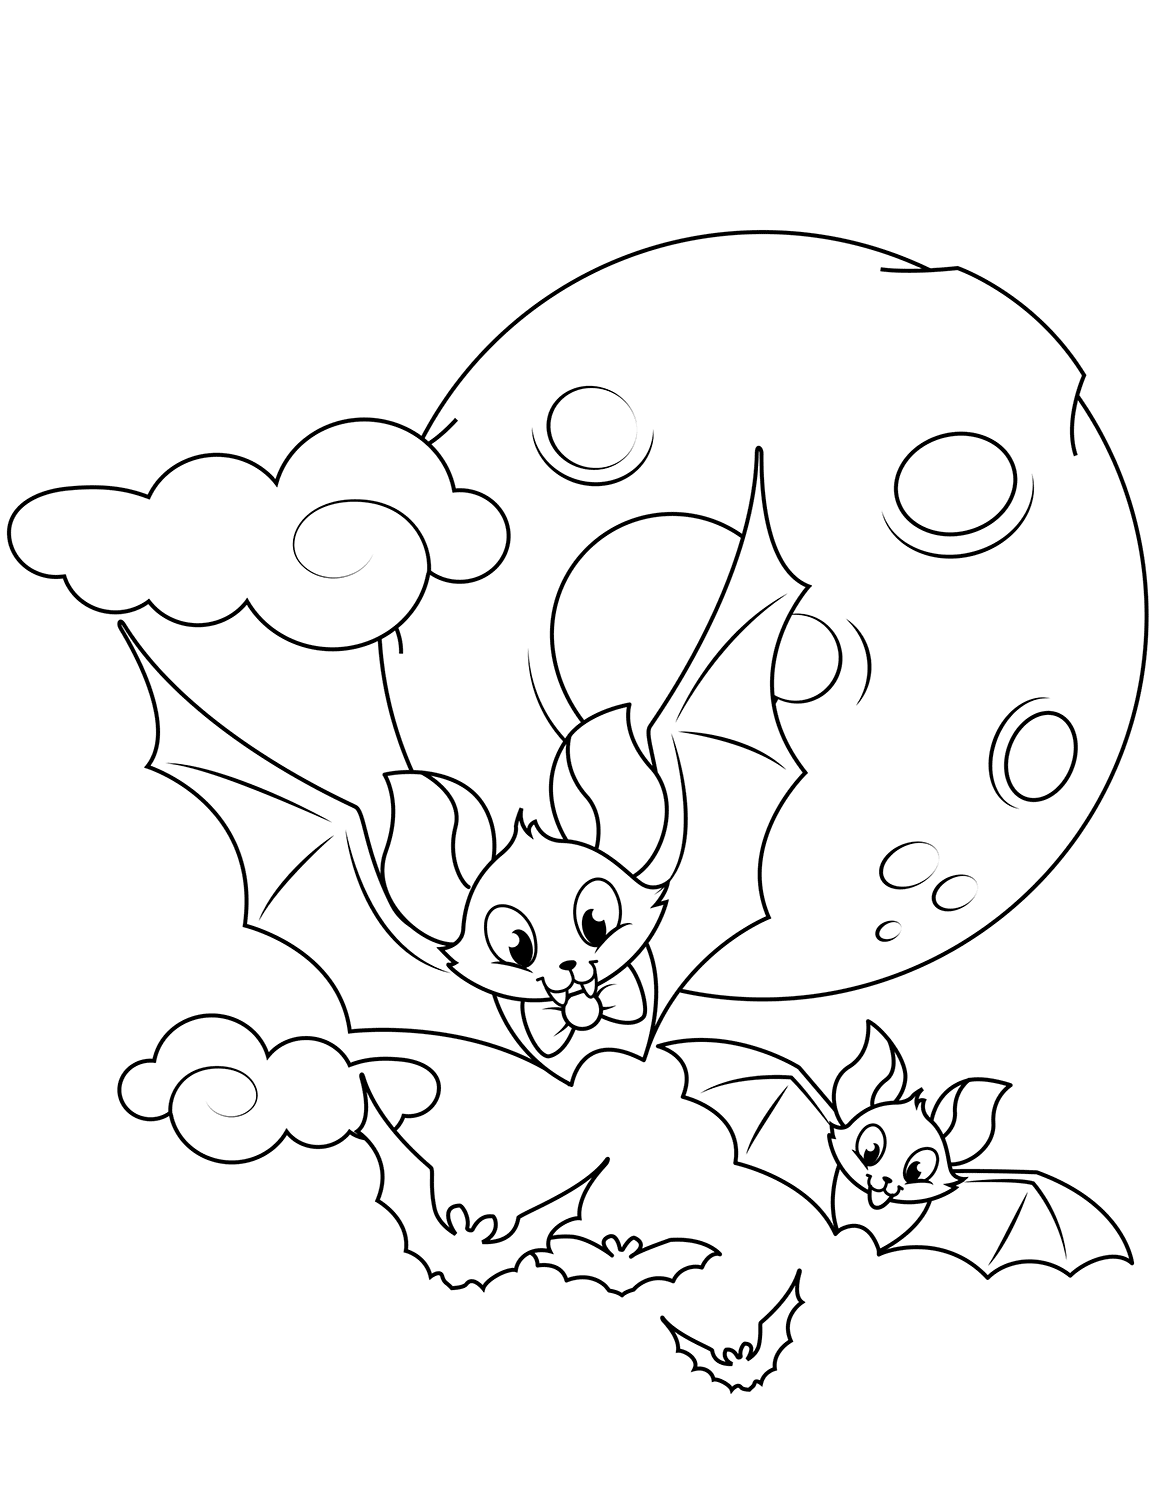 Cute Flying Bats Halloween Coloring Page